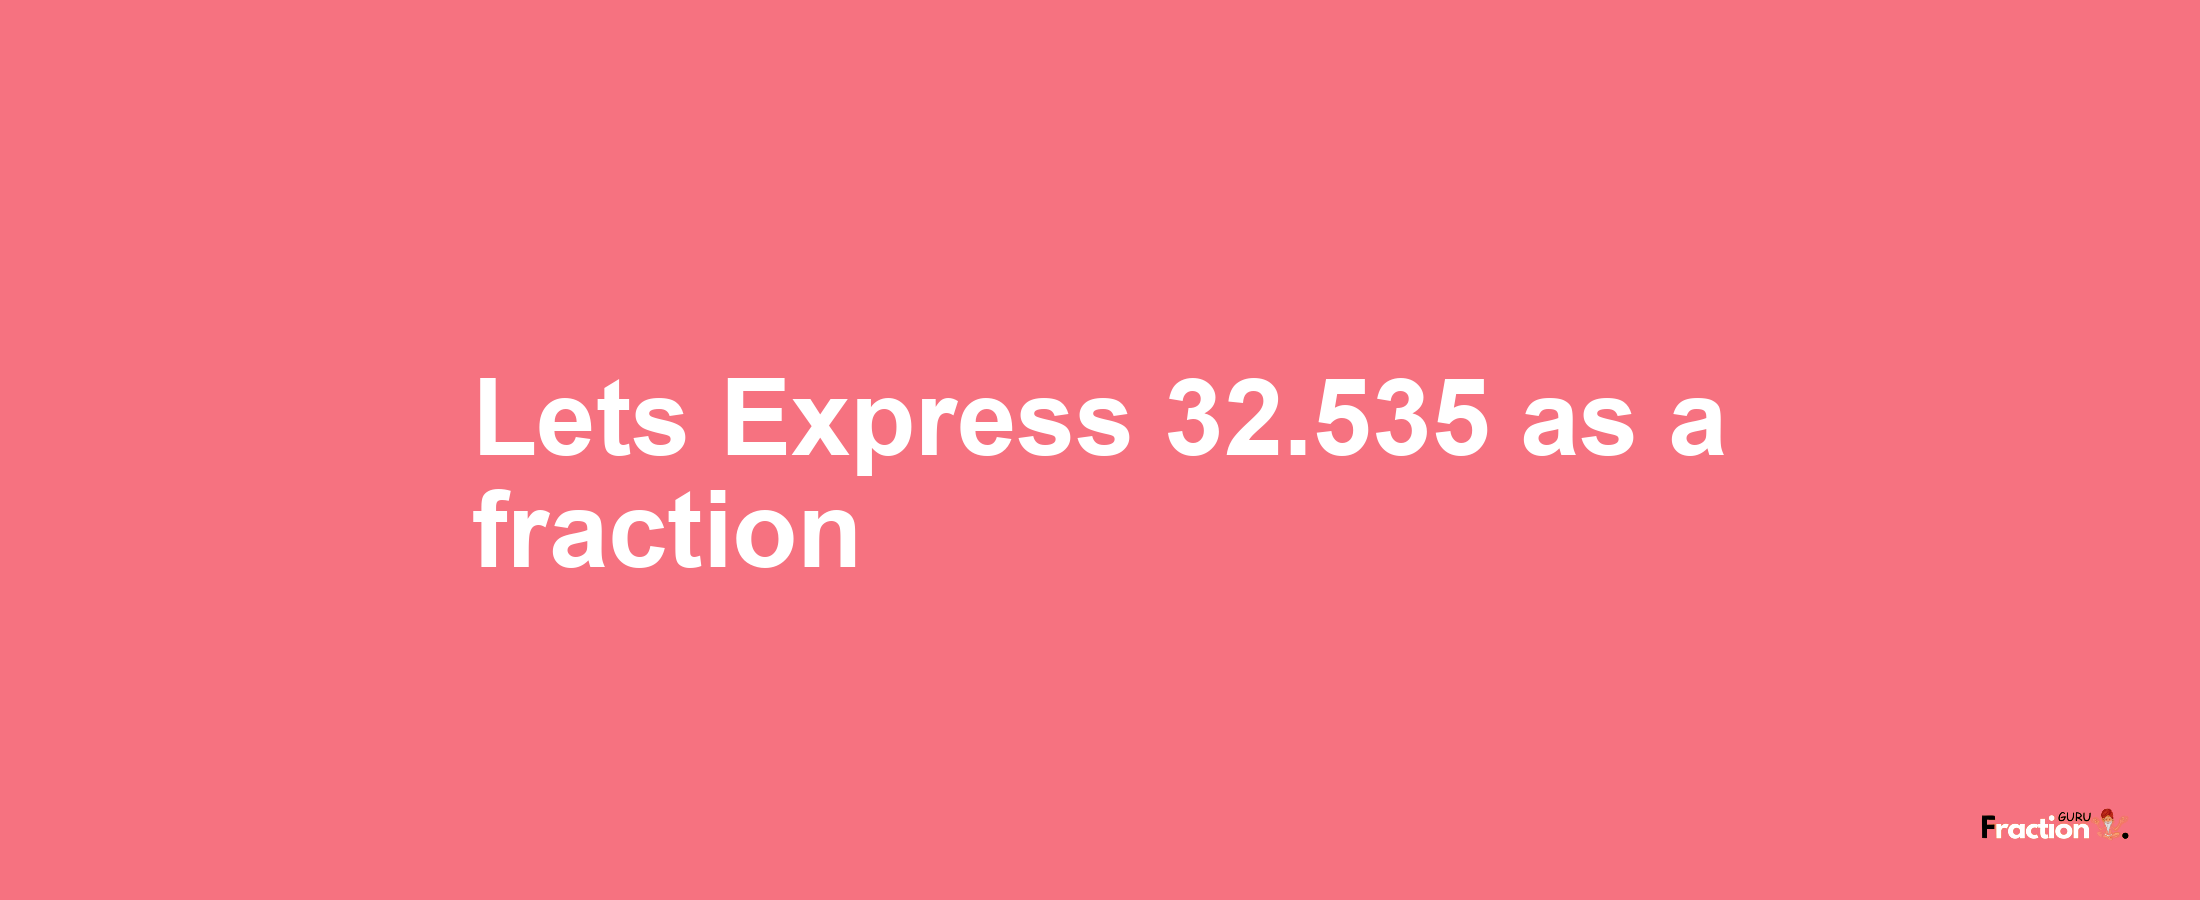 Lets Express 32.535 as afraction